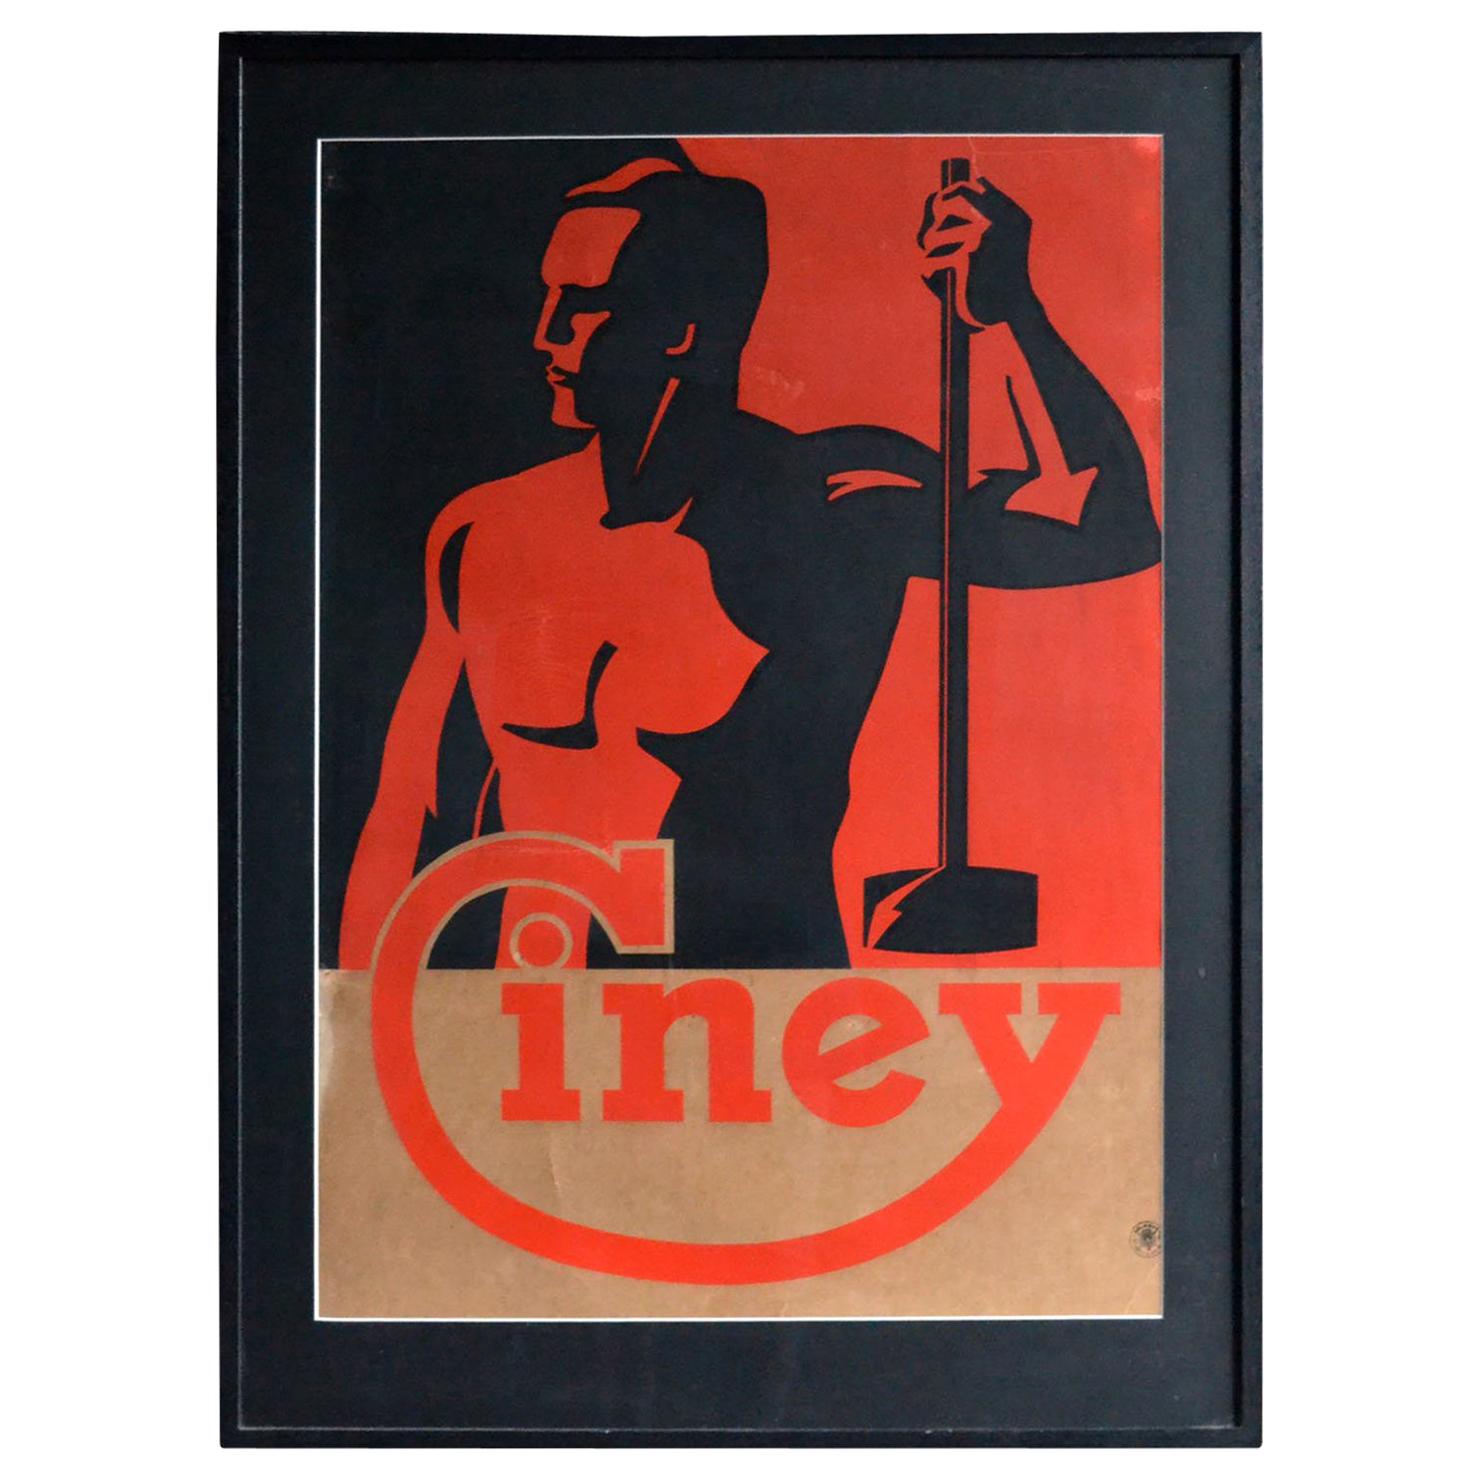 Art Deco Poster Advertising Ciney Belgium 1930s in Red and Black For Sale